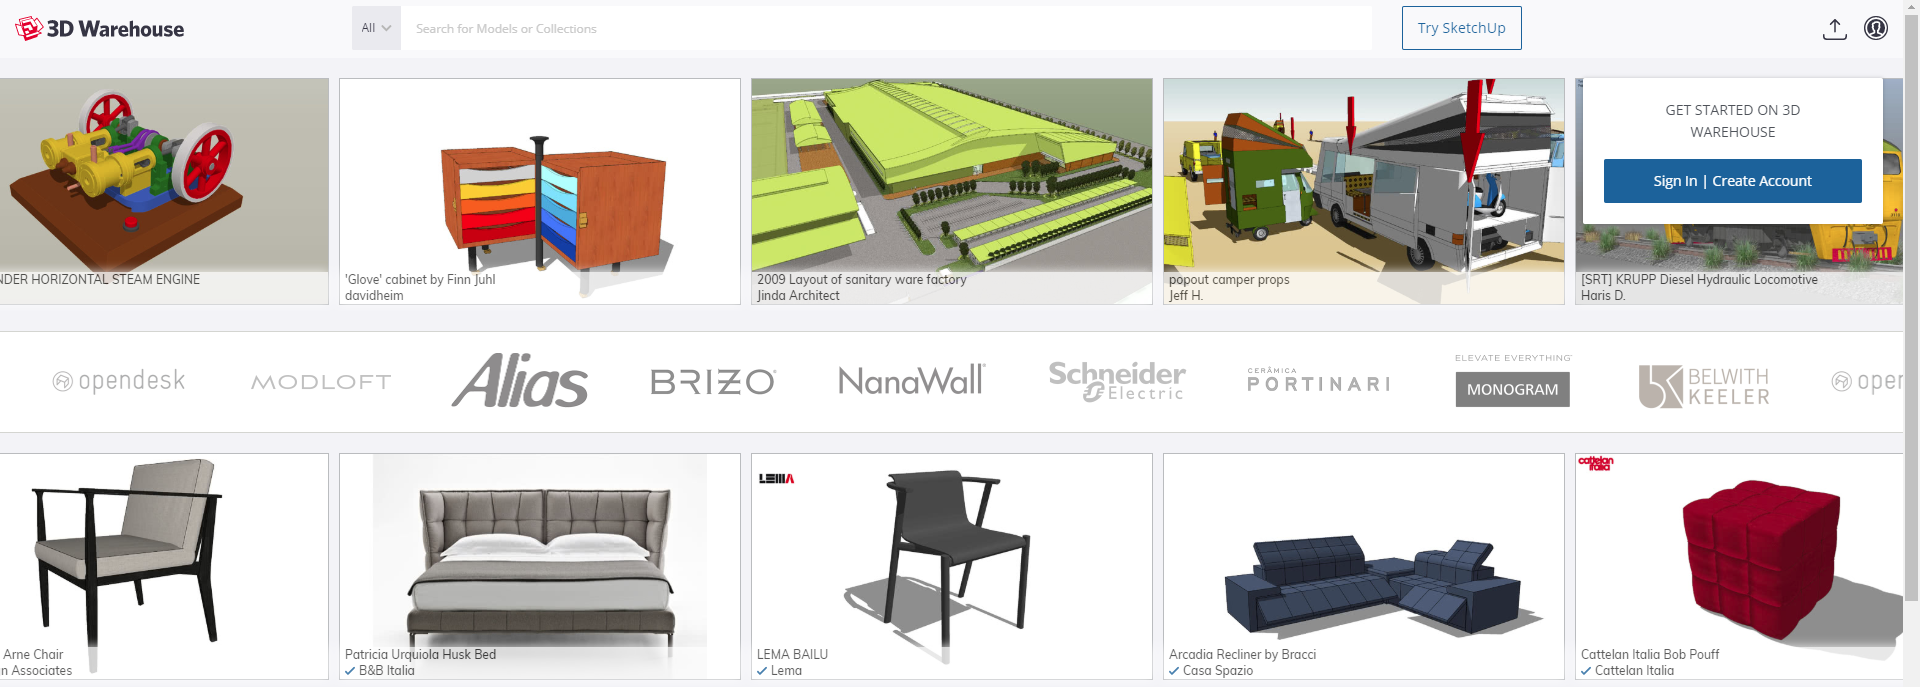 sunburst, musings on the go: [Get 33+] Sketchup Warehouse Nessun Accesso